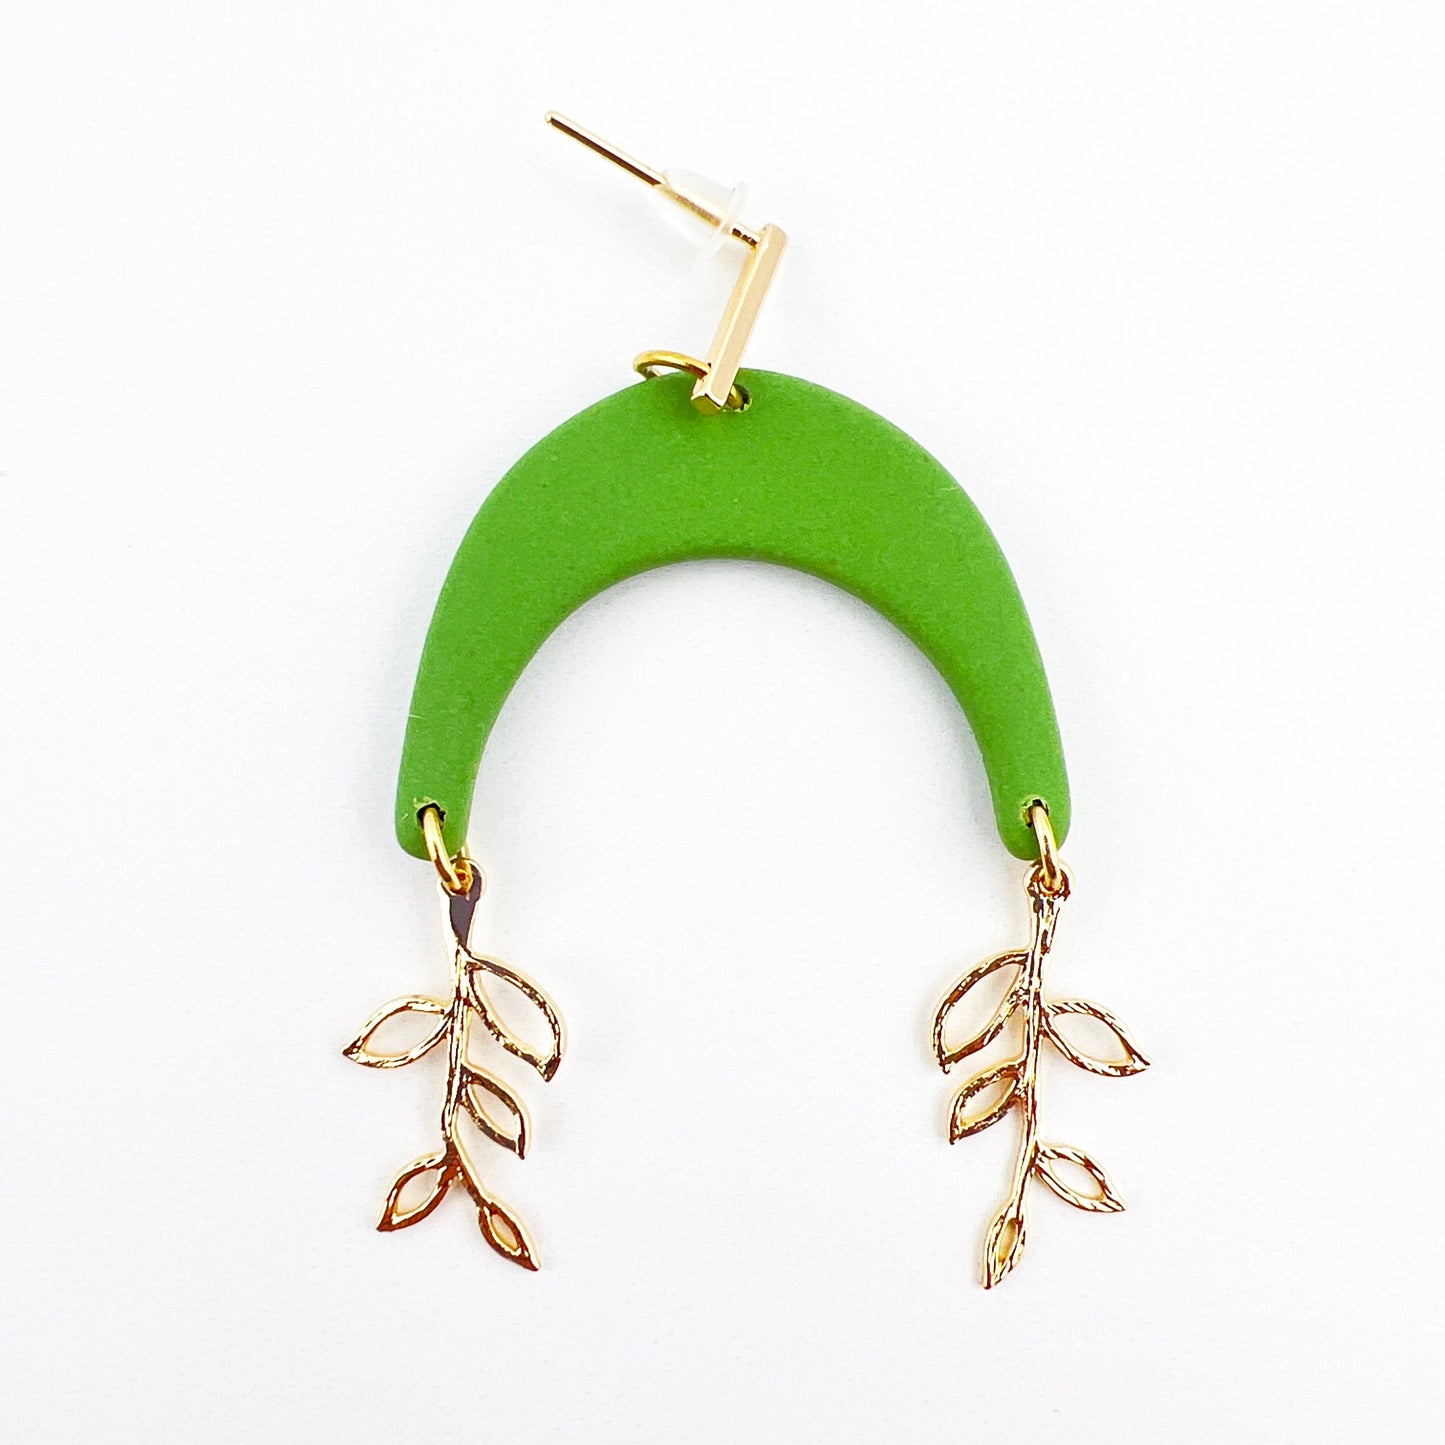 Earrings Green Arches with Gold Vine Charms Earrings